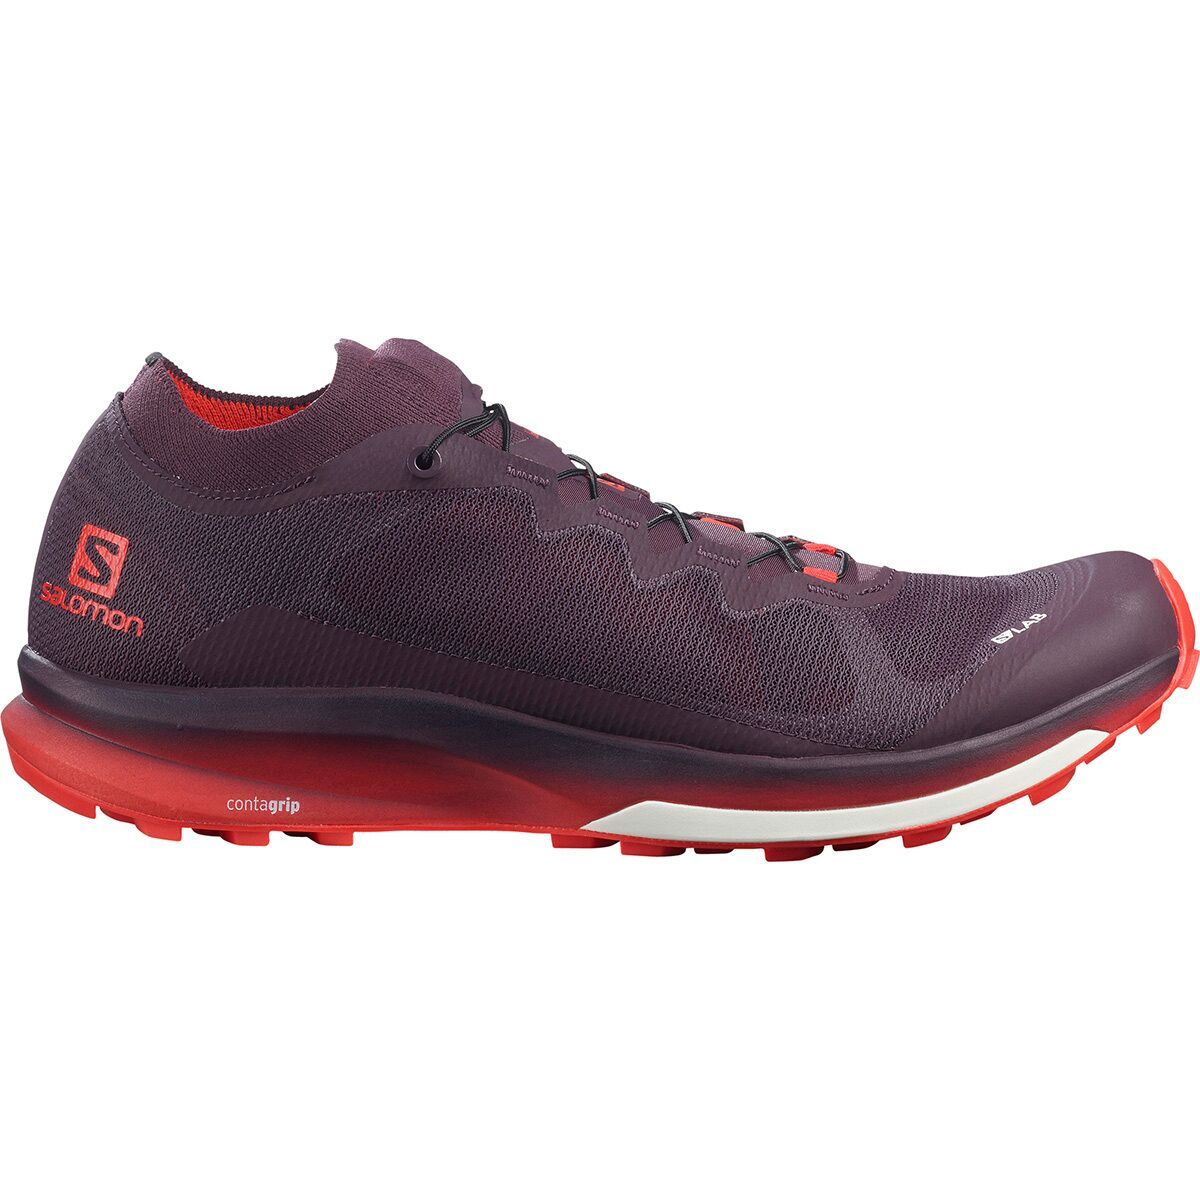 outdoor gear lab trail running shoes